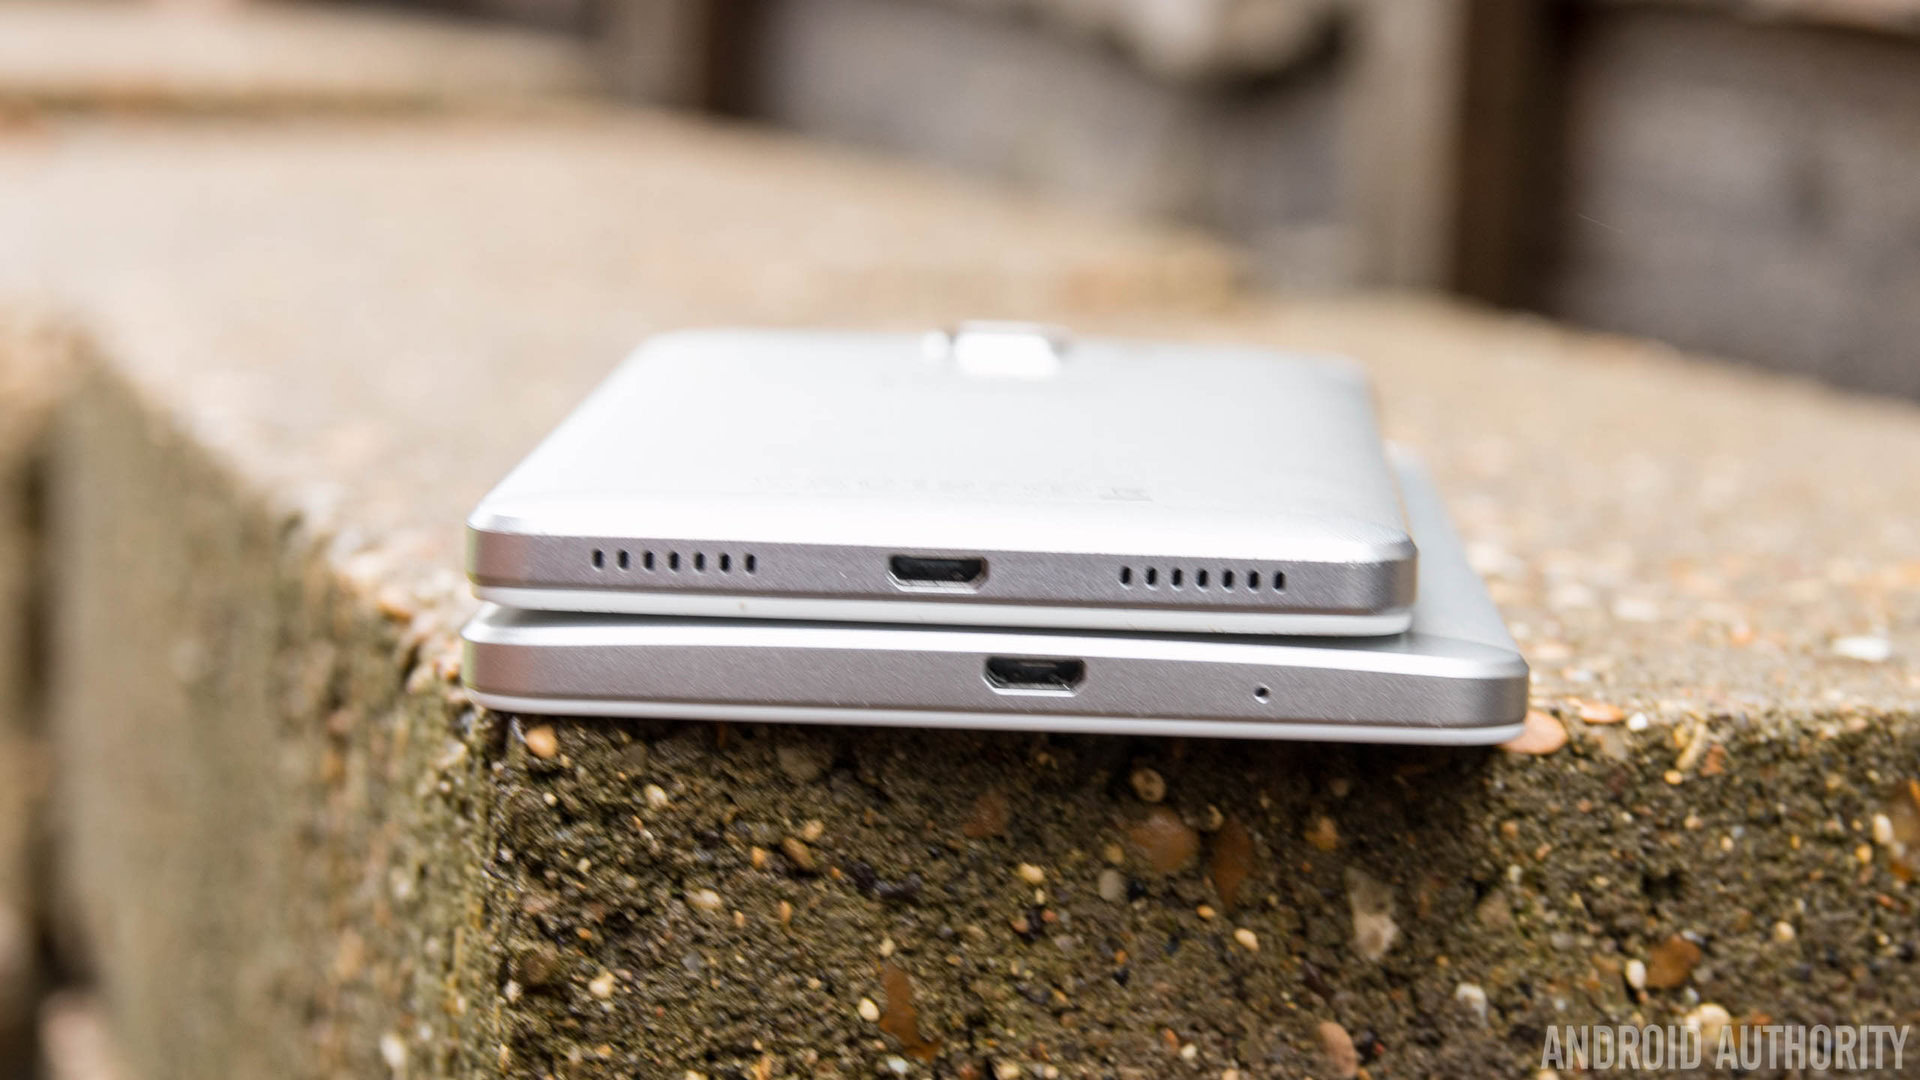 HUAWEI 7 vs Mate 7 Android